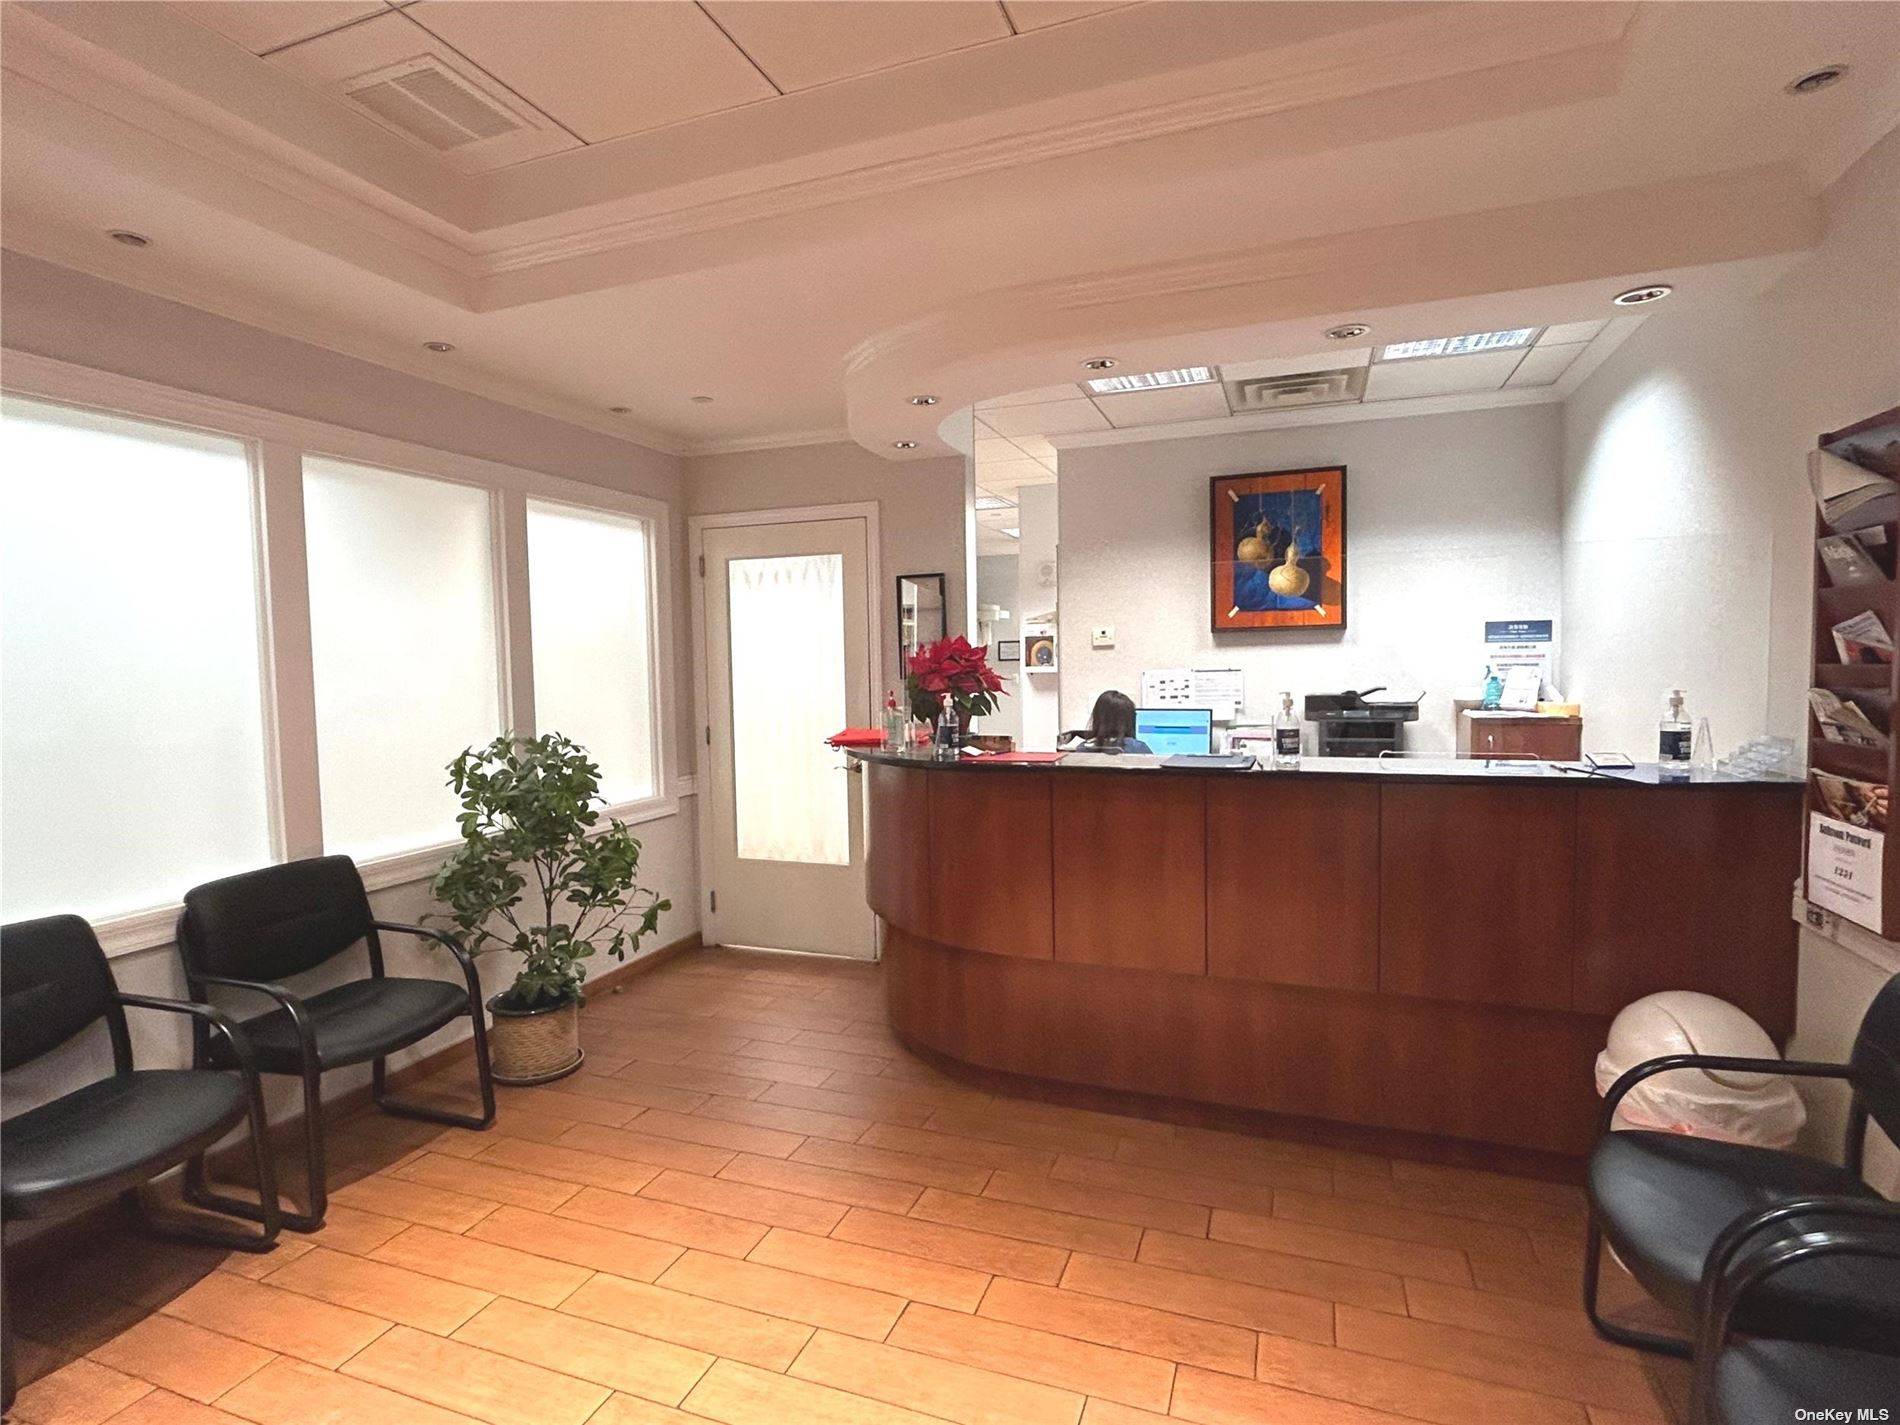 Fully equipped Dental Office available that can also be converted to medical or office space.